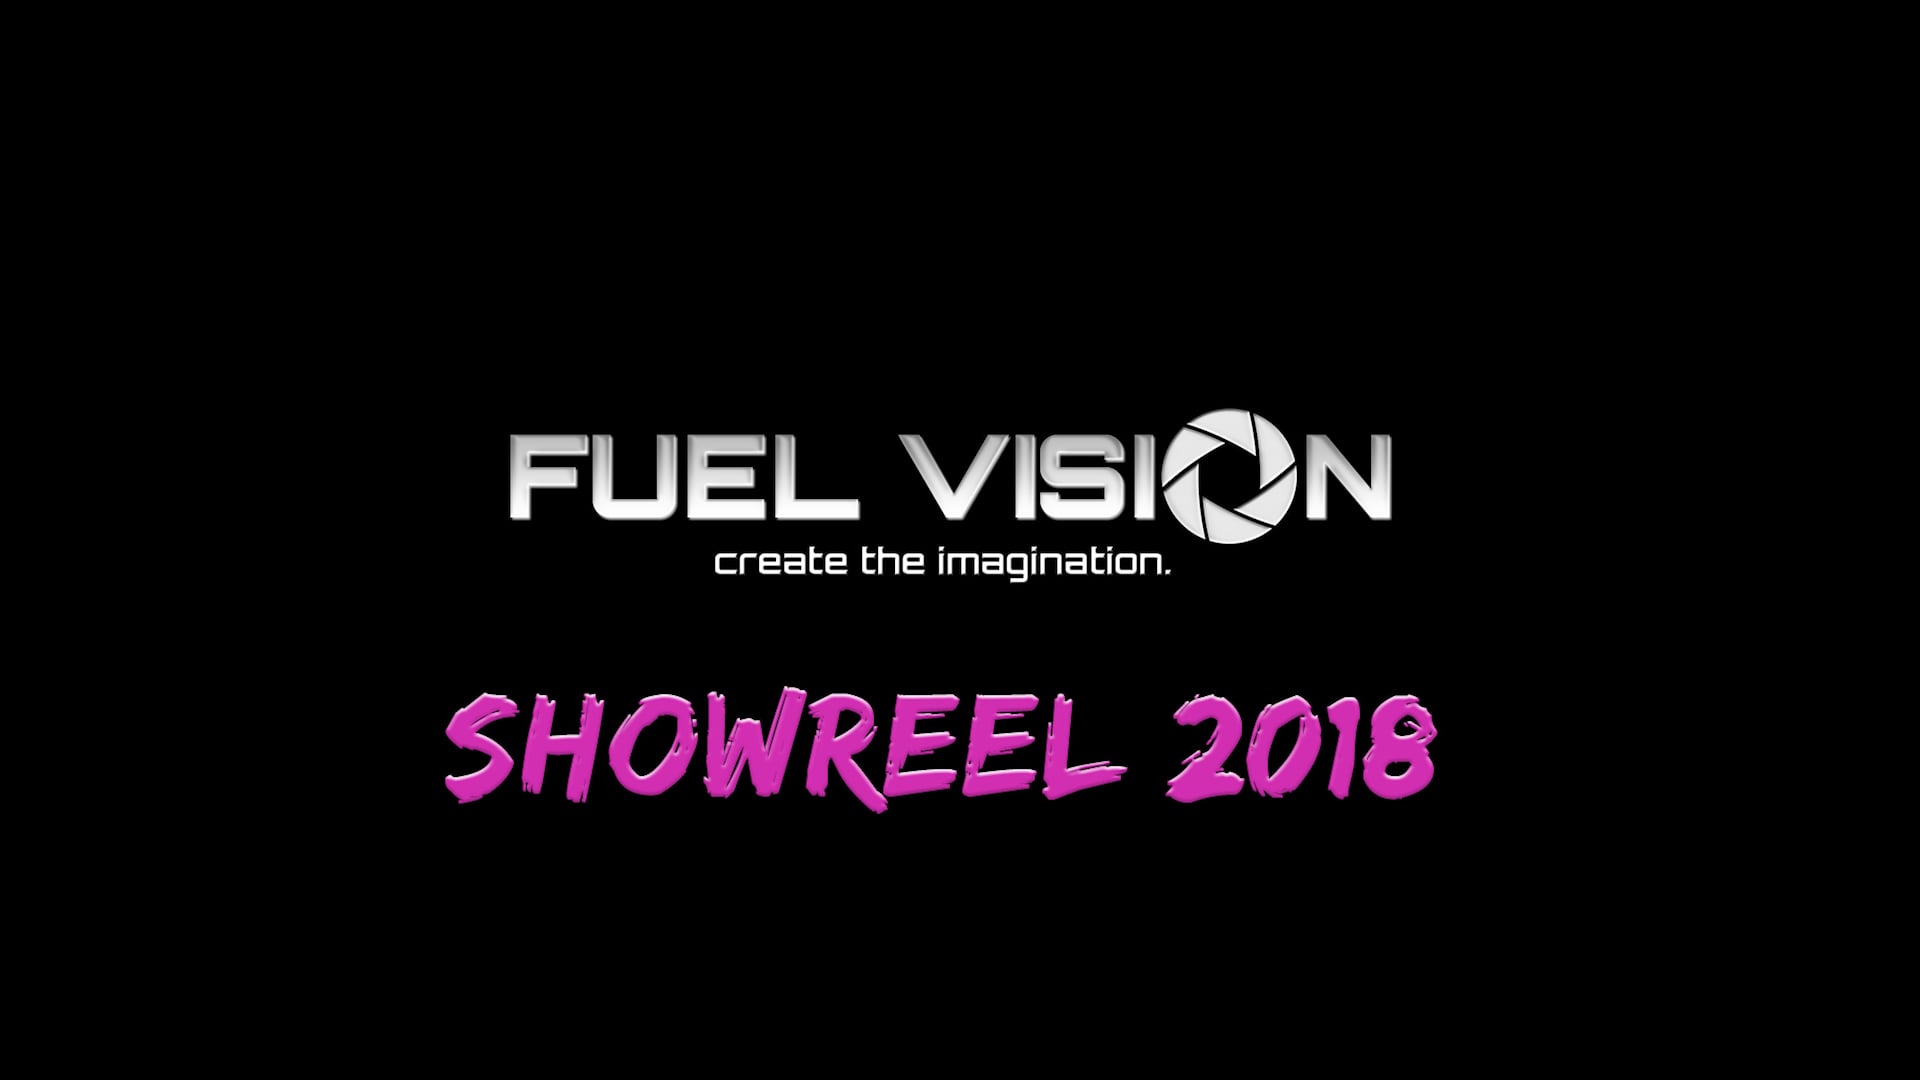 Fuel Vision Showreel - [Official Full HD Video] (2018)